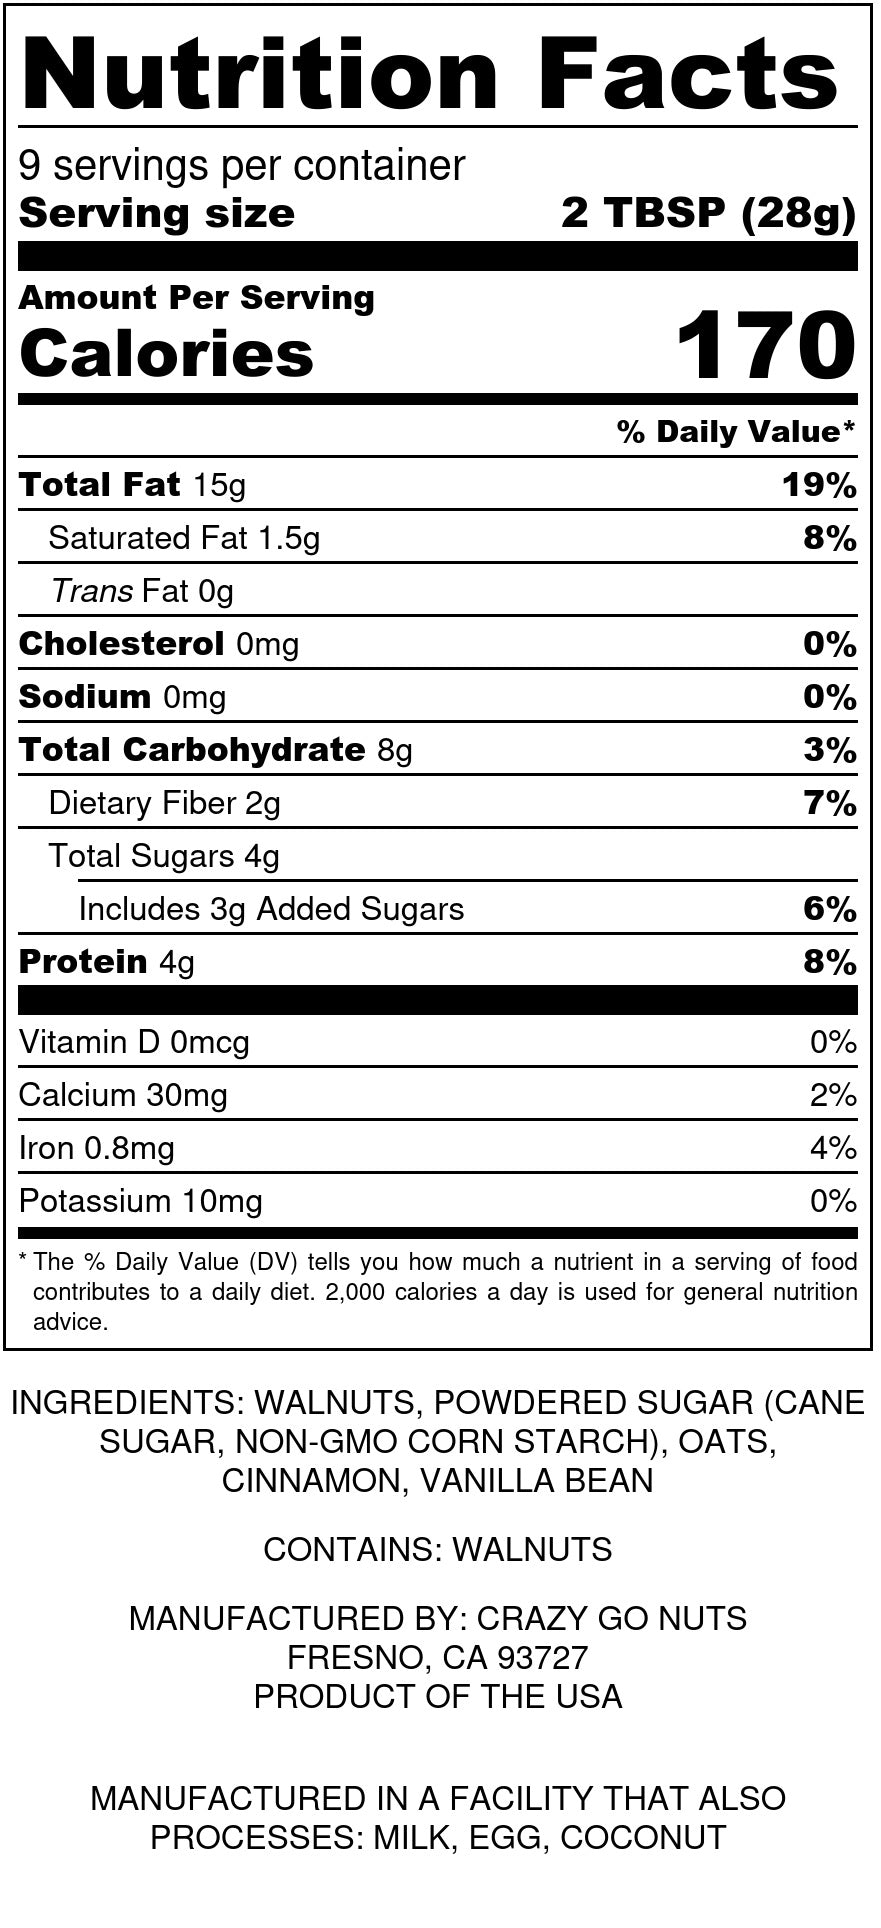 Nutrition panel for oatmeal cookie walnut butter. Ingredients include walnuts, powdered sugar, oats, cinnamon, and vanilla bean